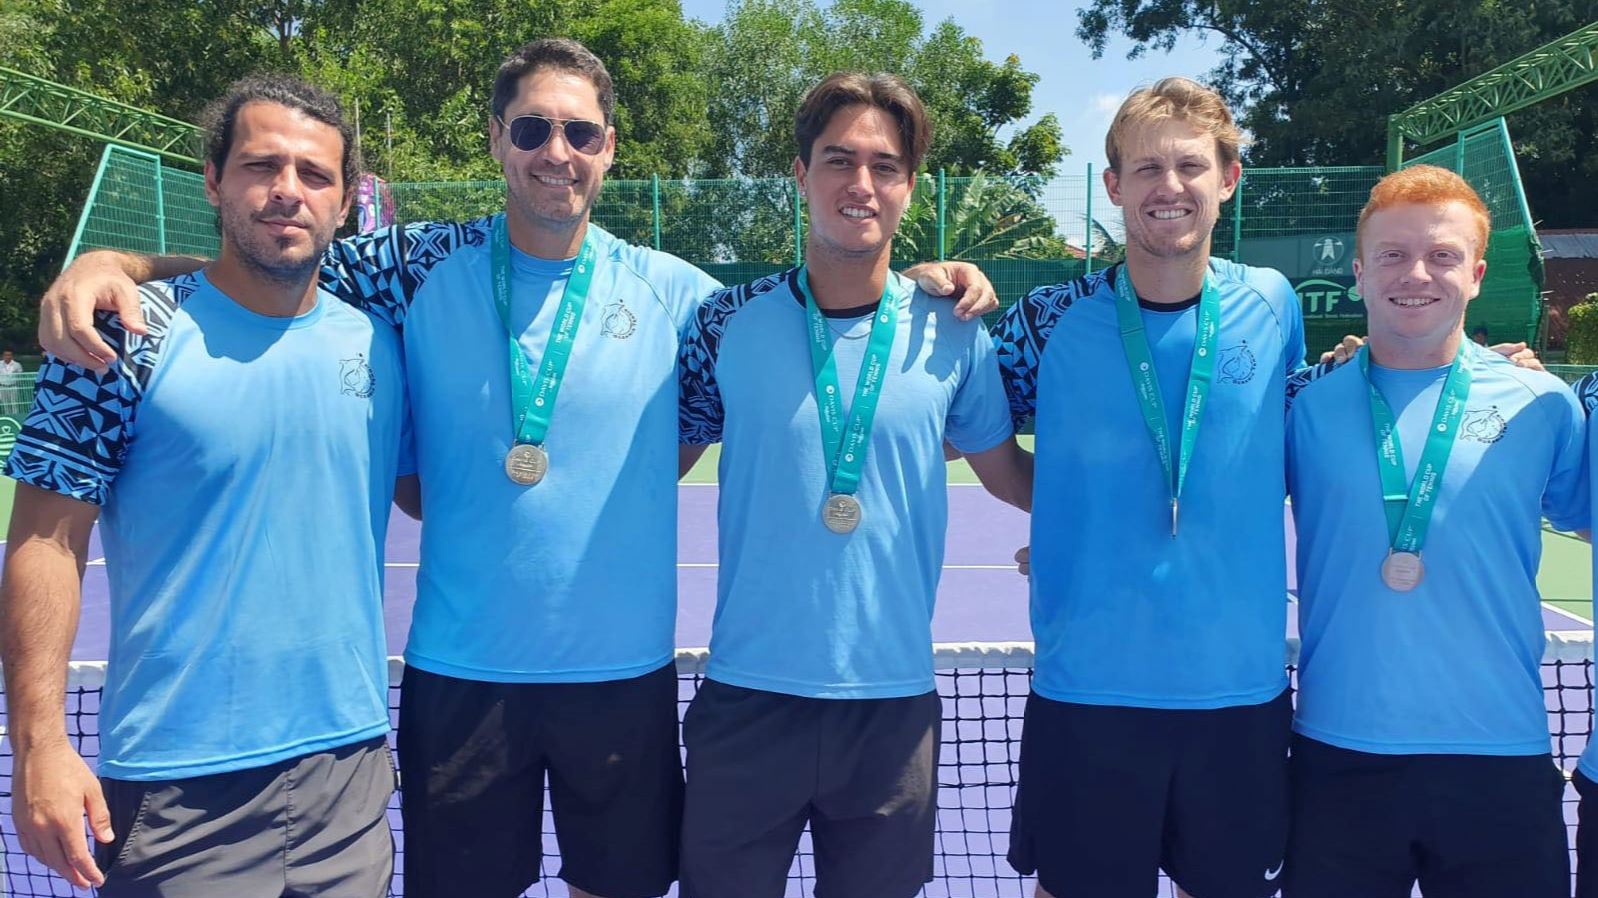 Pacific Oceania Davis Cup team wins gold medal